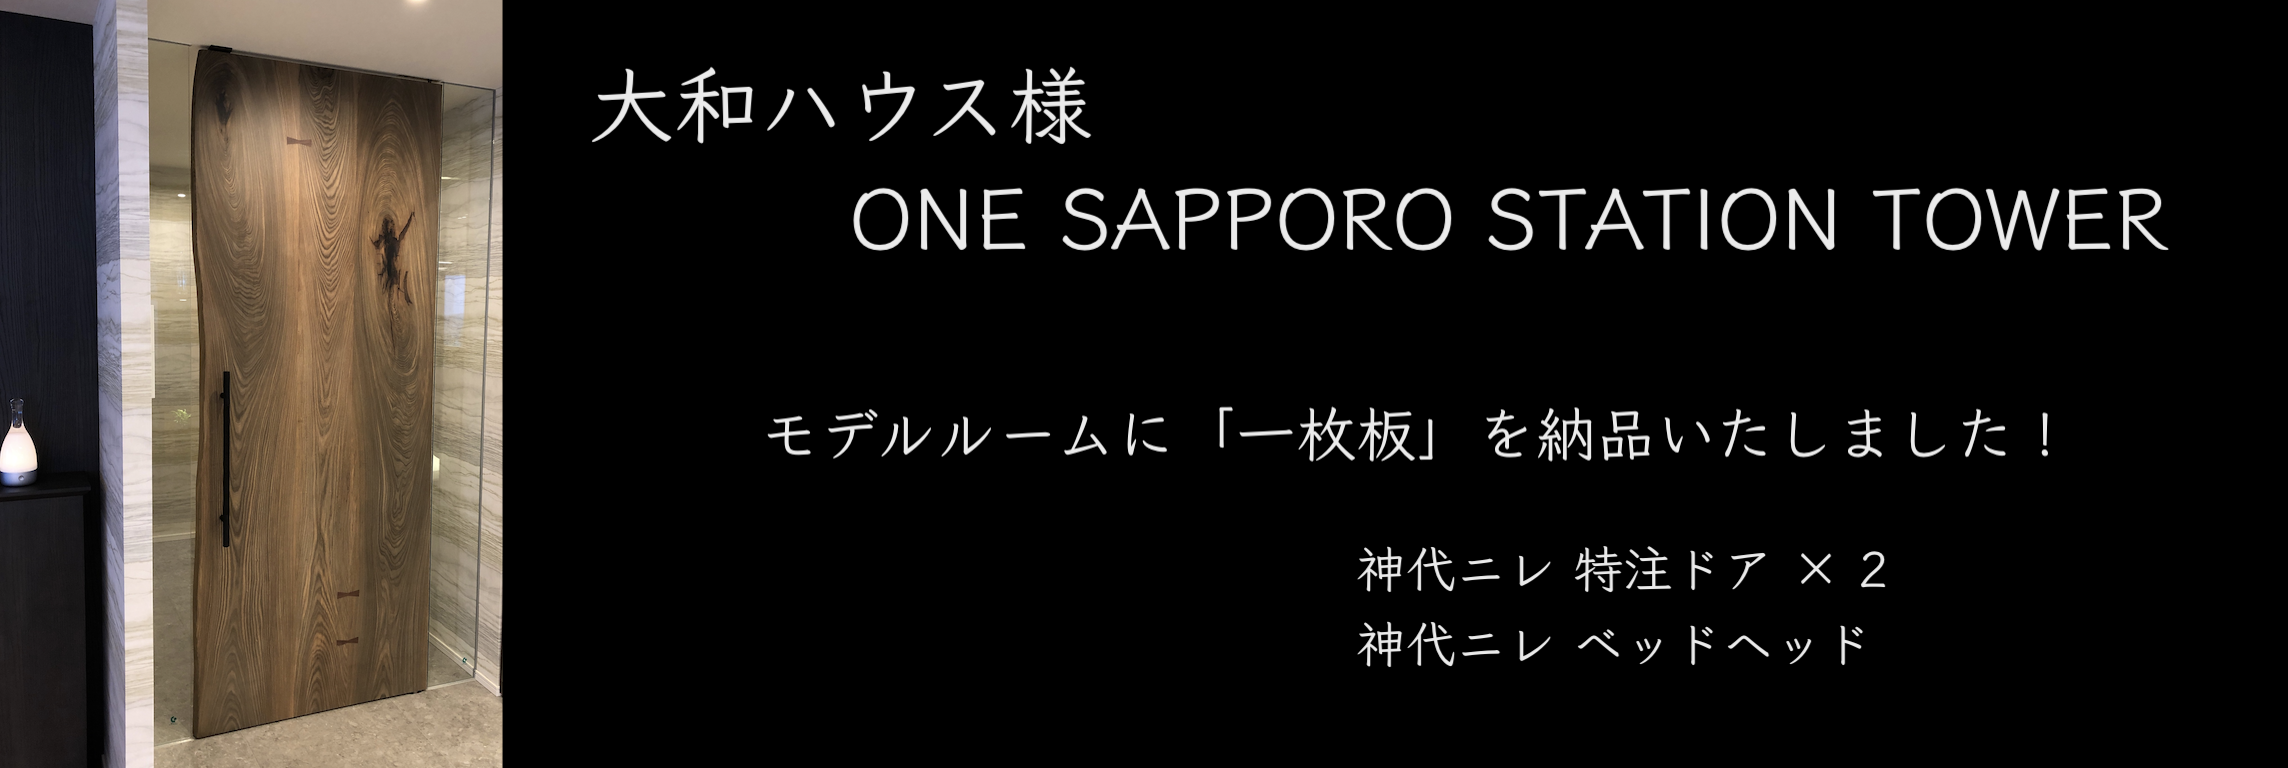 one sapporo station